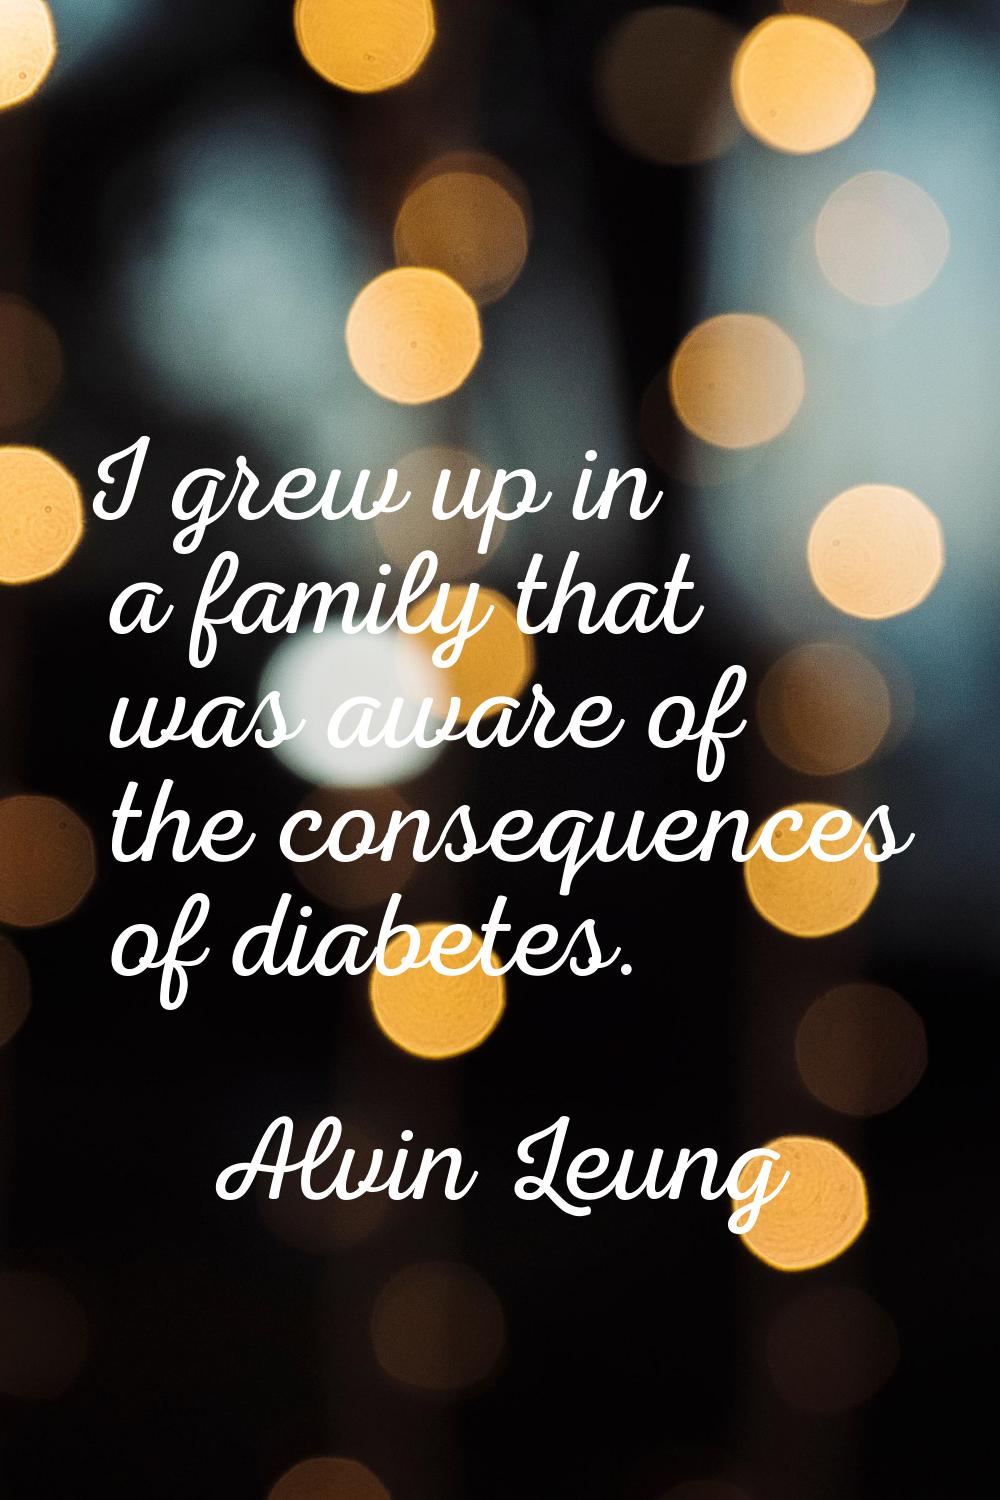 I grew up in a family that was aware of the consequences of diabetes.